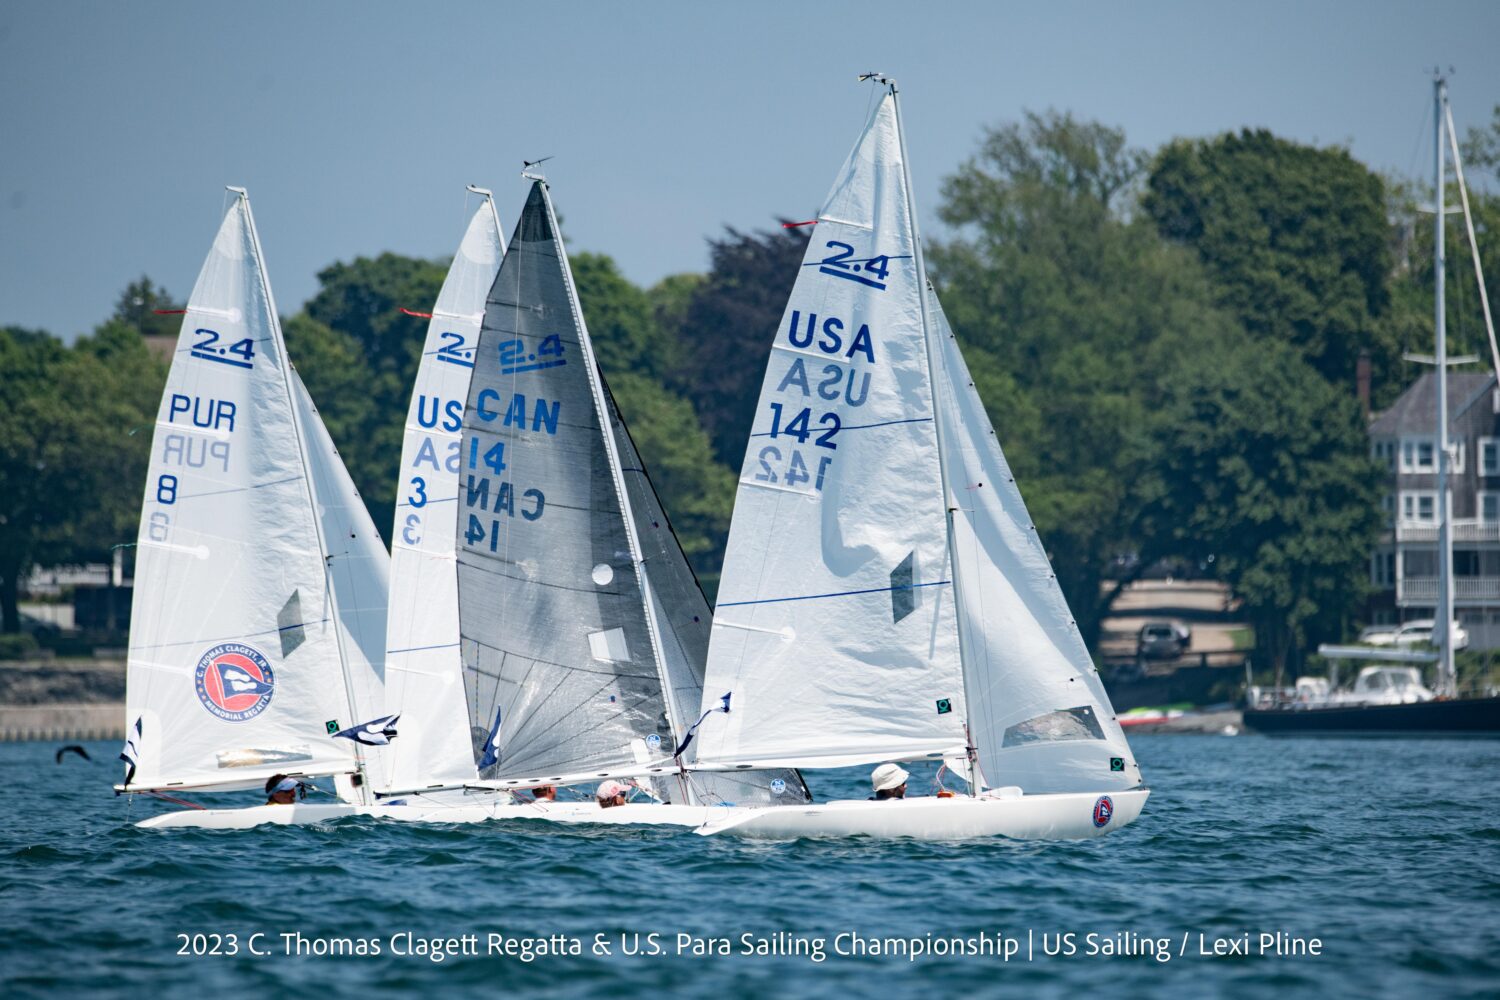 Five US Athletes to Compete at the 2023 Para Sailing World Championship